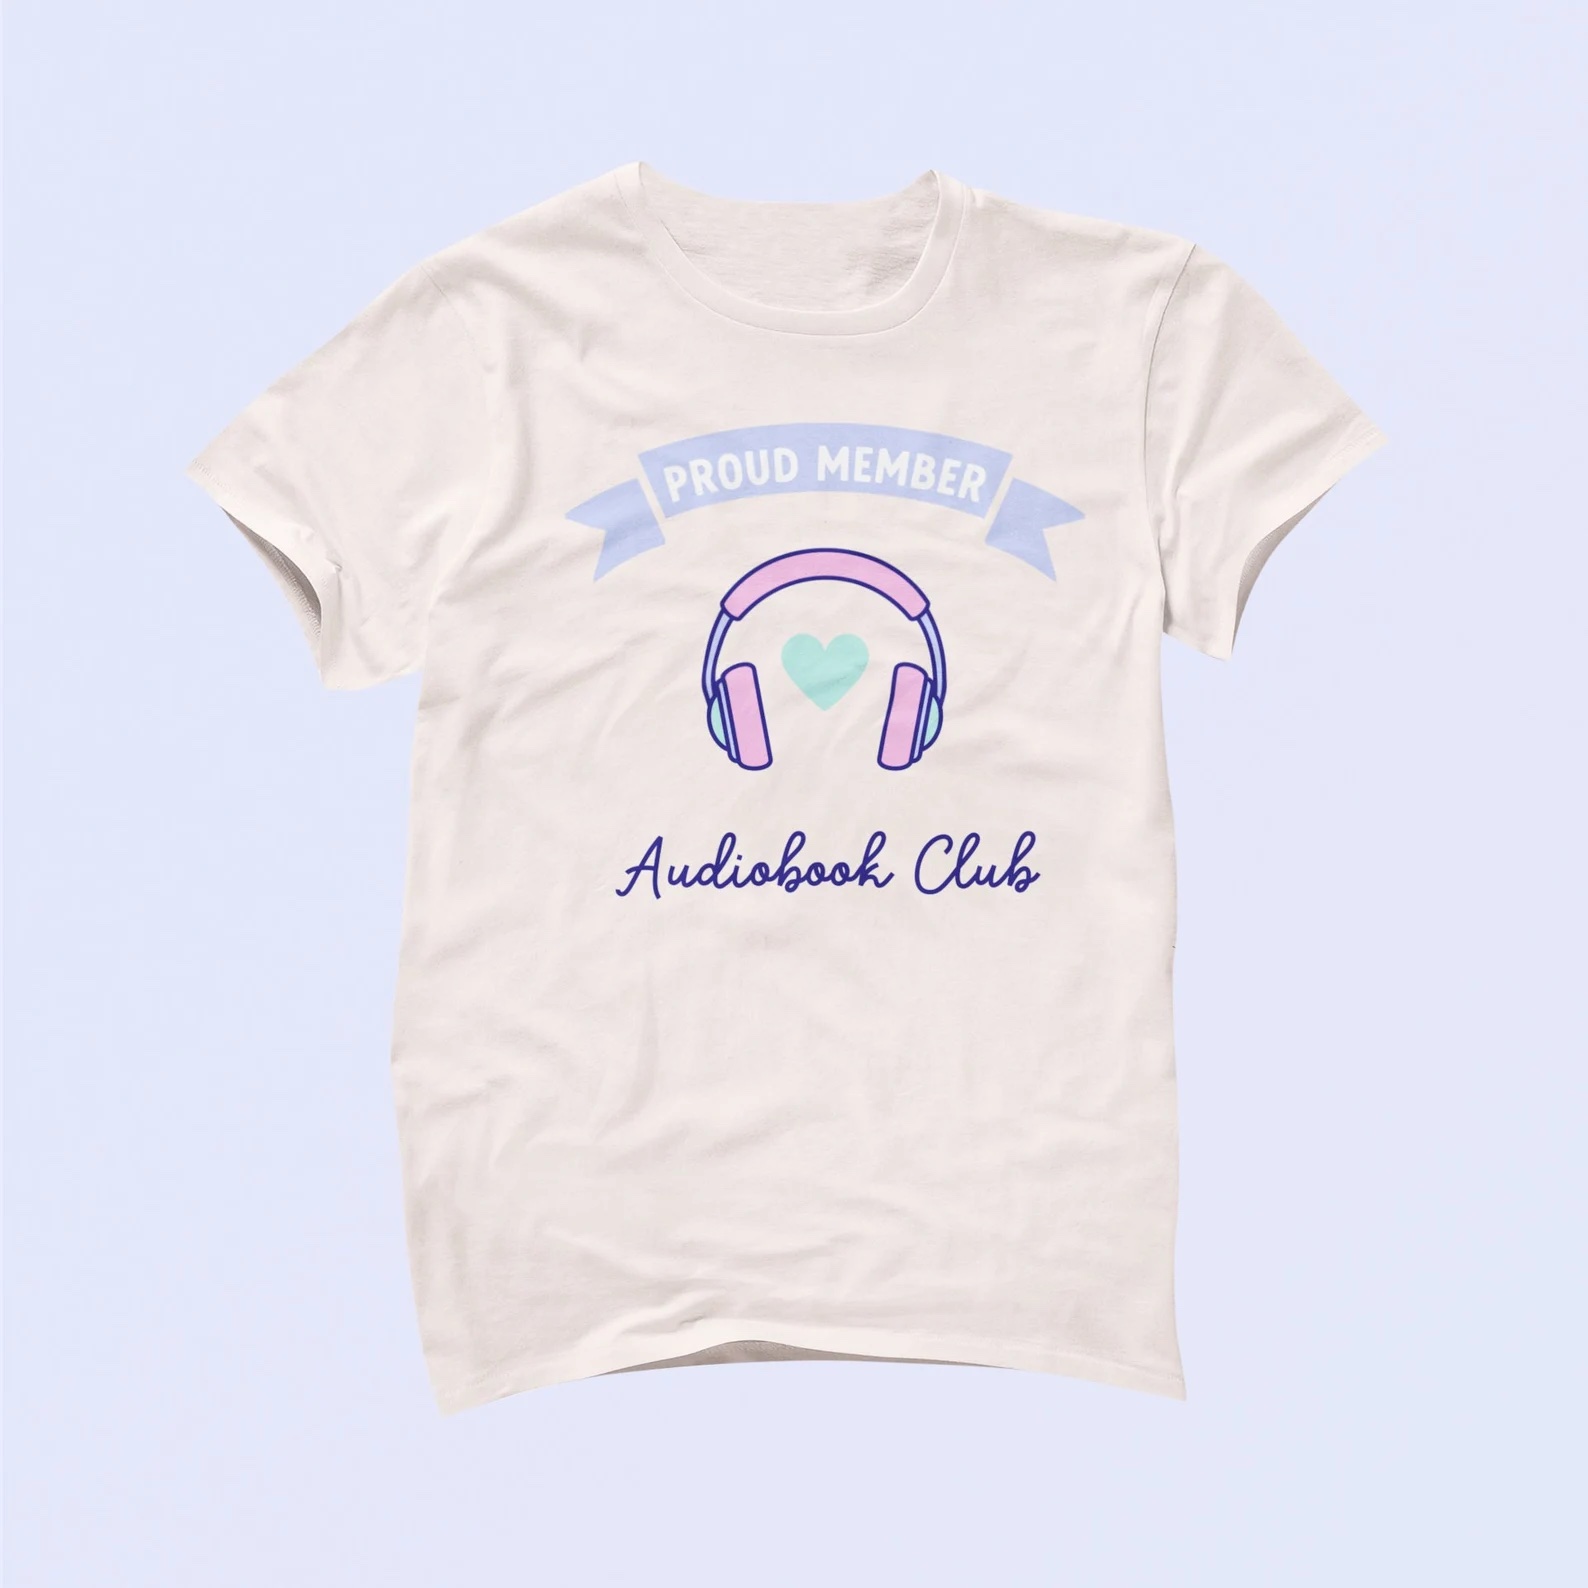 A photo of a t-shirt that says proud member of audiobook club